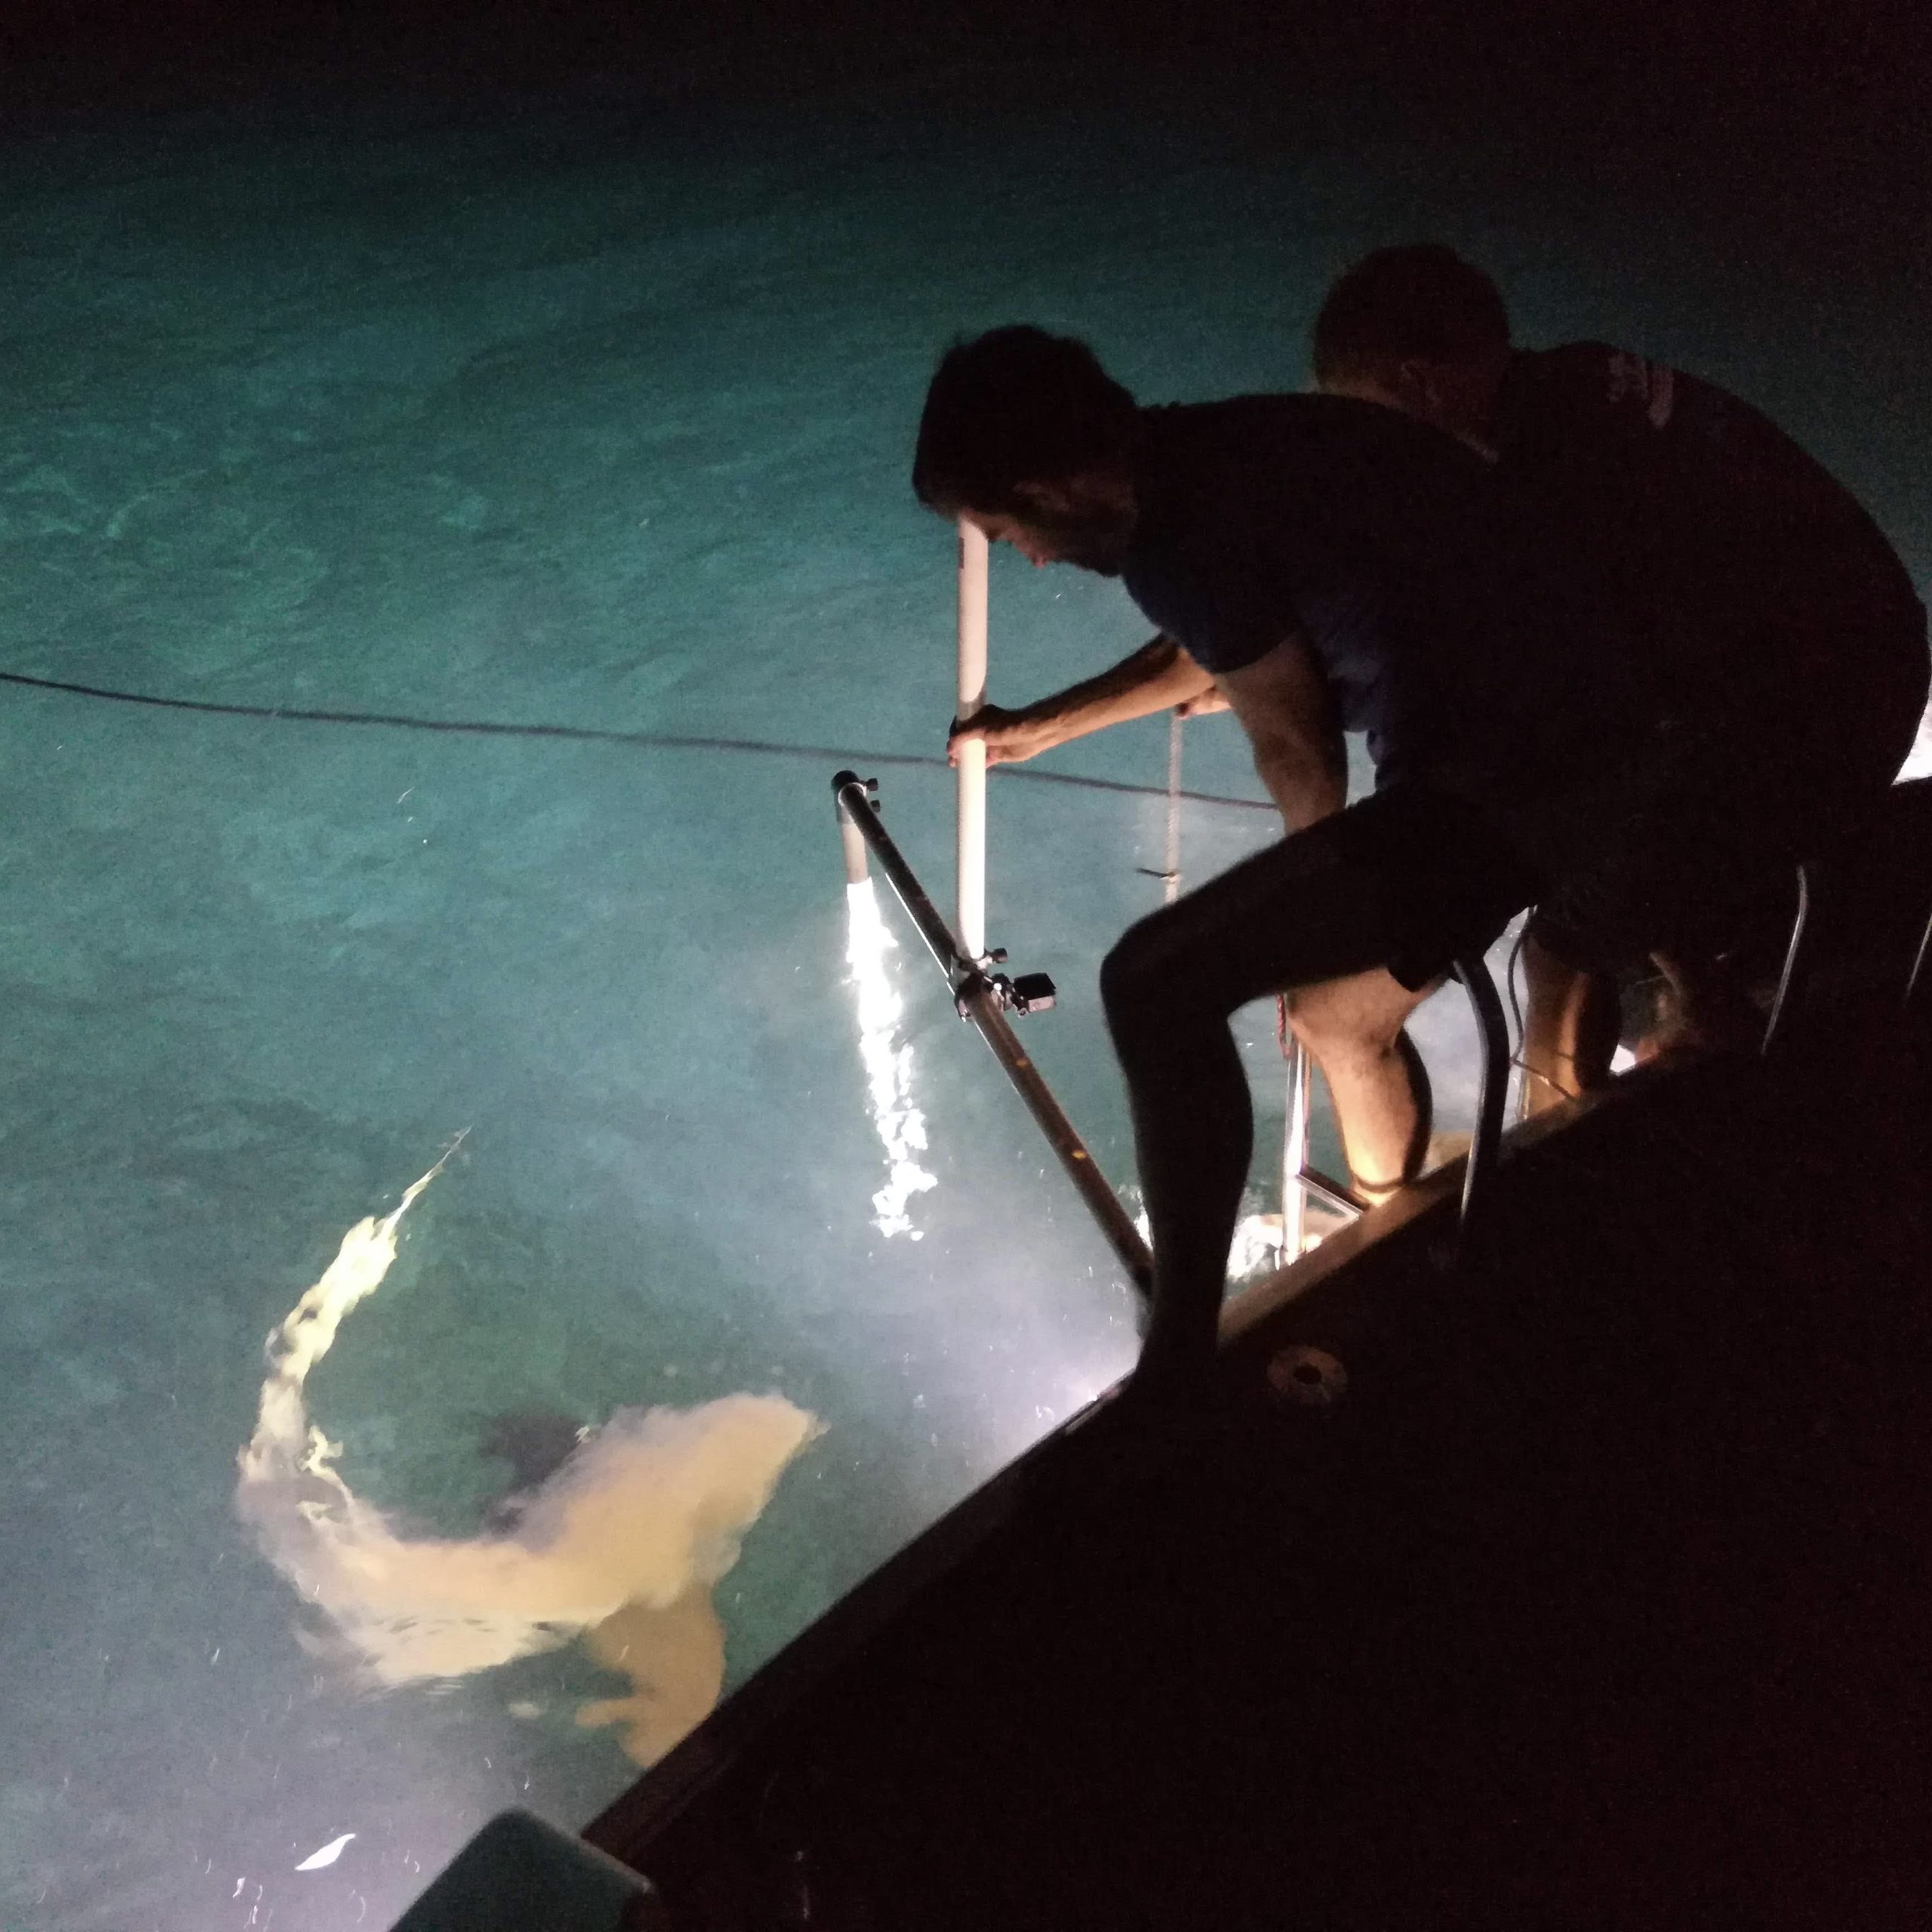 Working late into the night collecting data. PC: Annabelle Brooks.